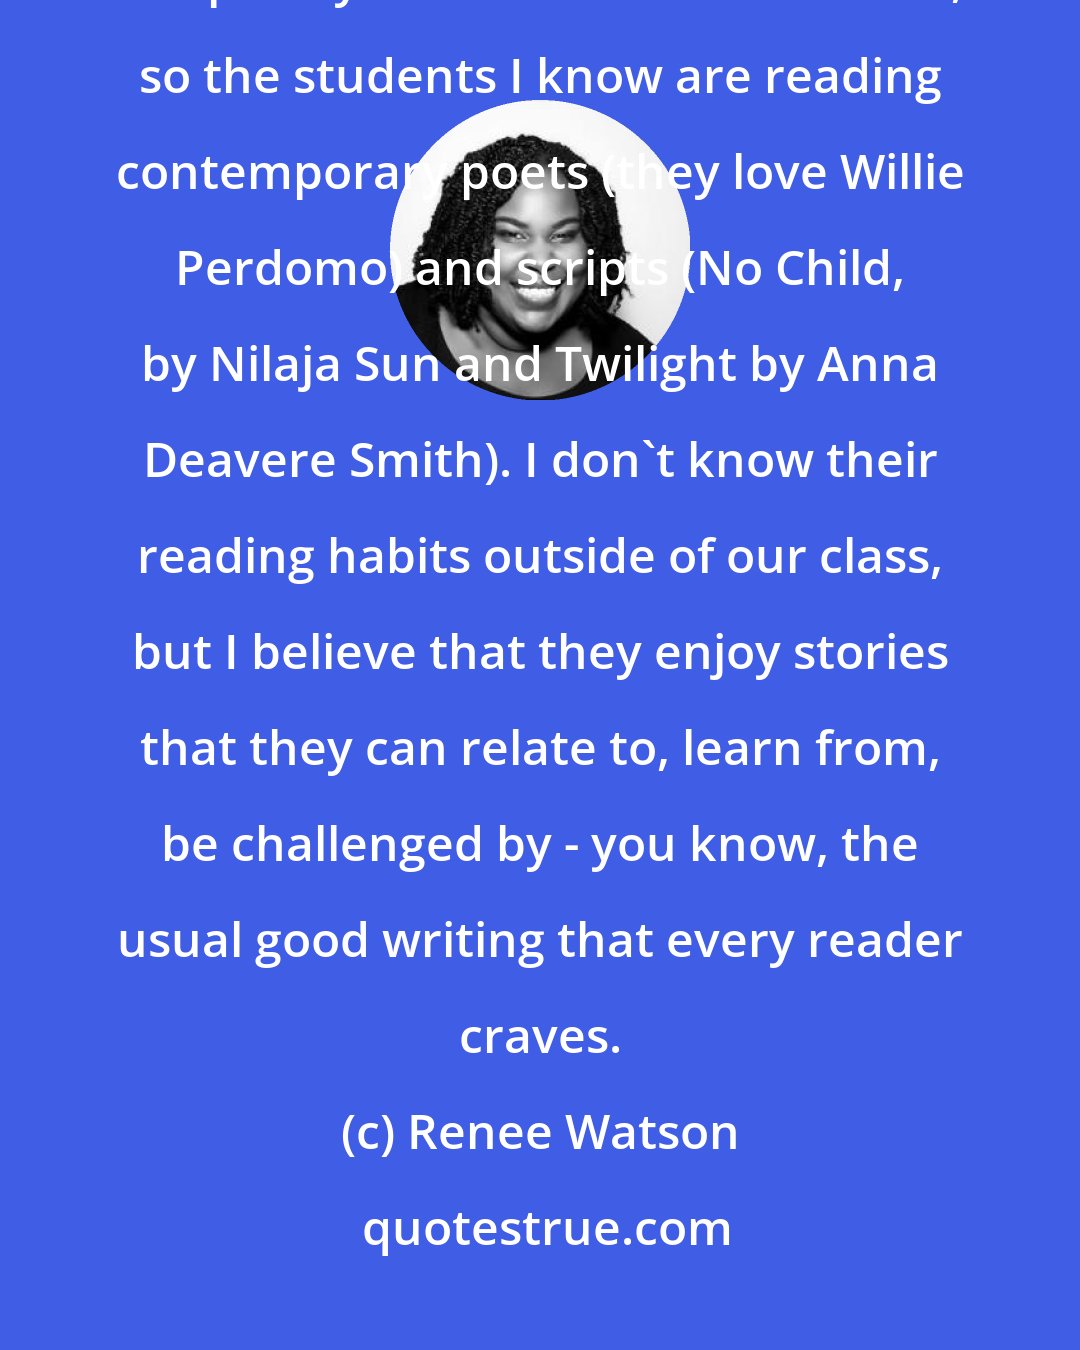 Renee Watson: These days, most of my interactions with young people are centered on the poetry or theater classes I teach, so the students I know are reading contemporary poets (they love Willie Perdomo) and scripts (No Child, by Nilaja Sun and Twilight by Anna Deavere Smith). I don't know their reading habits outside of our class, but I believe that they enjoy stories that they can relate to, learn from, be challenged by - you know, the usual good writing that every reader craves.